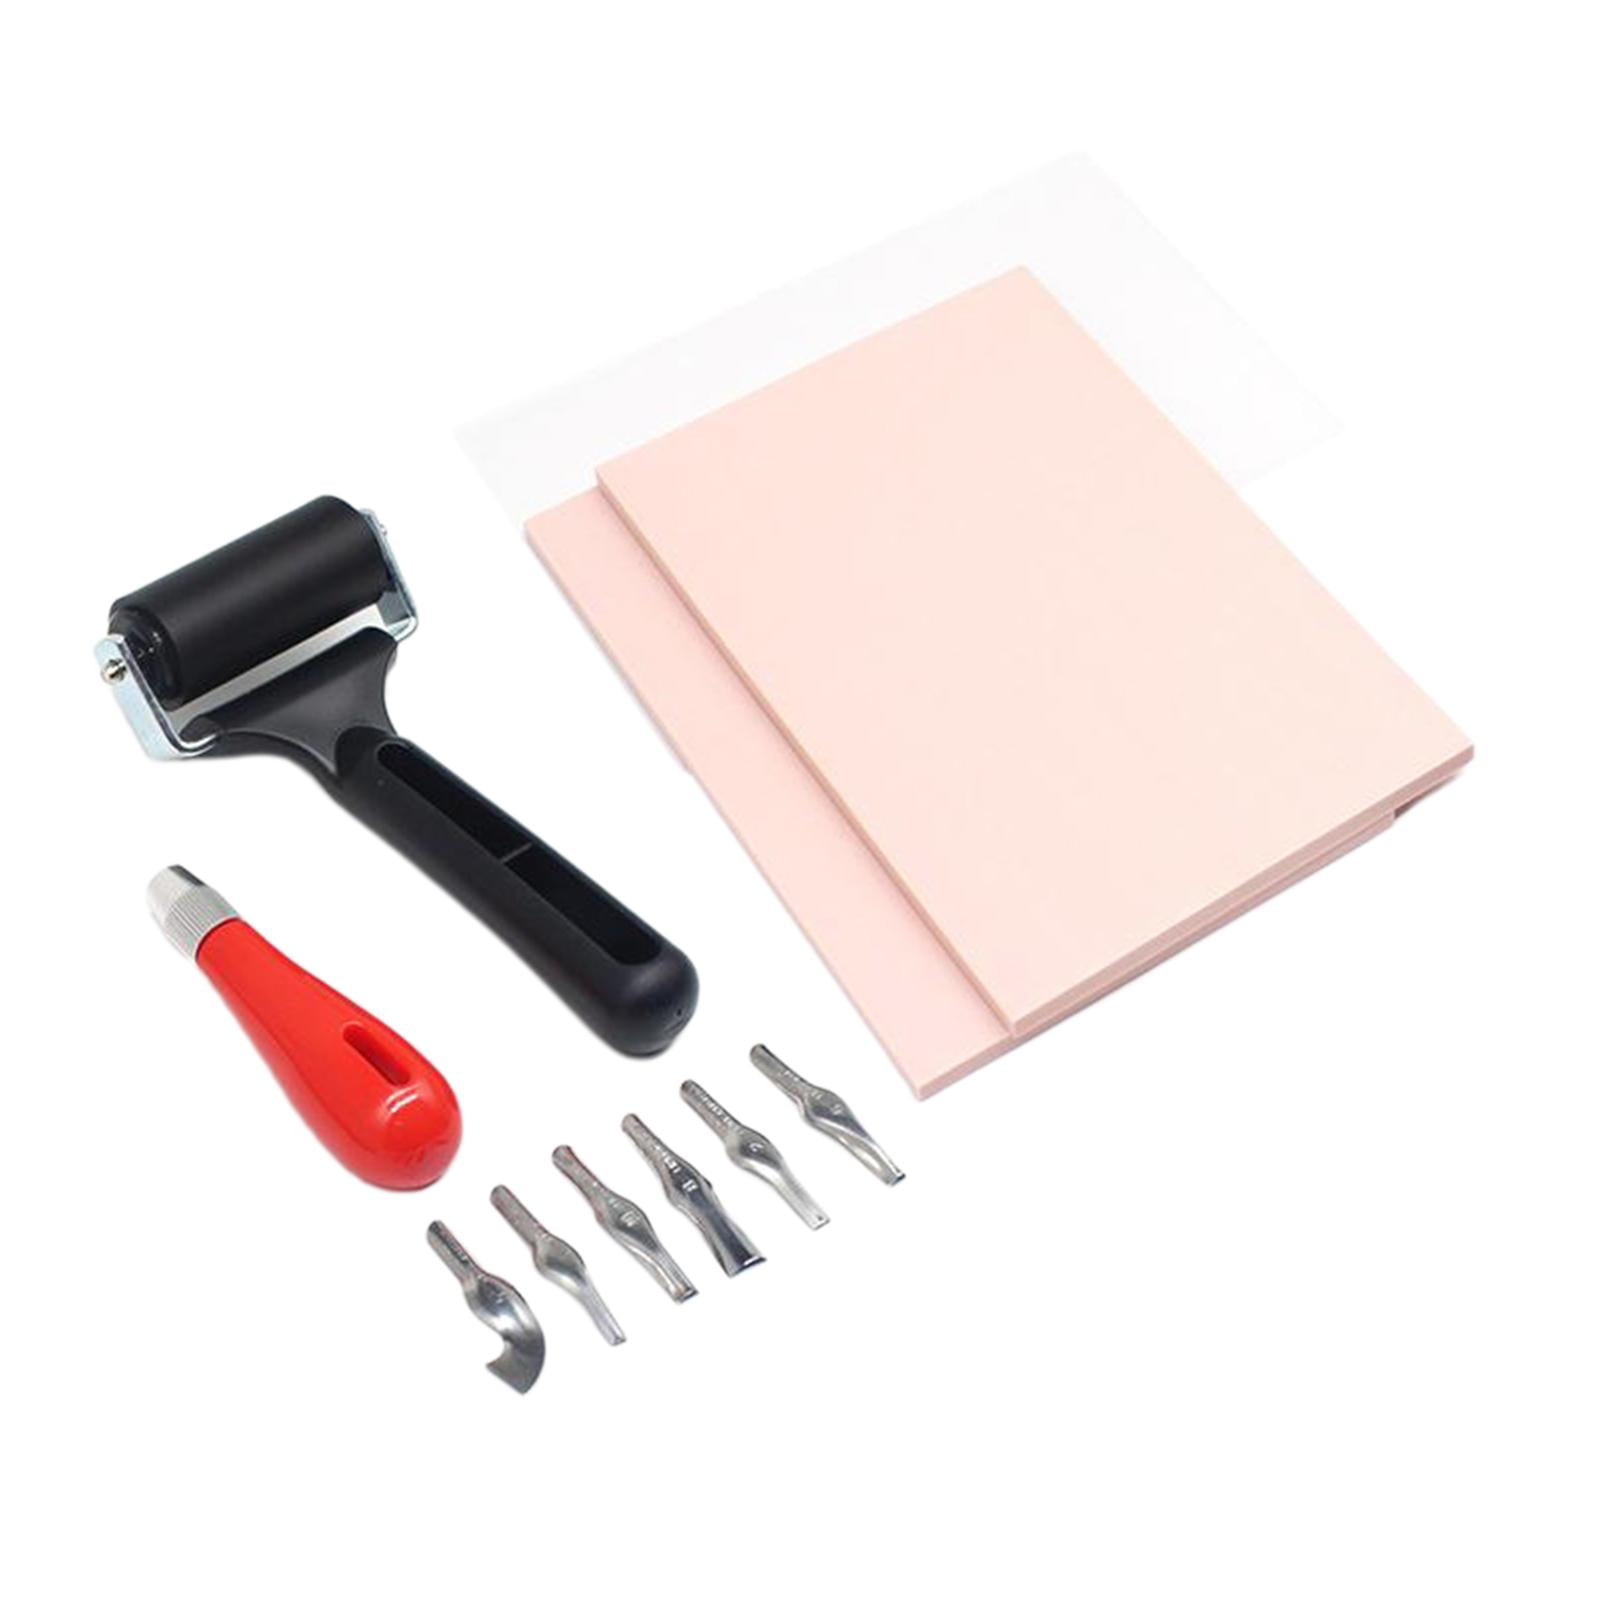 Tracing Paper Rubber Stamp Brayer Roller Printmaking Starter/Block Printing/Rubber Stamp Making kit Gift Box Includes Lino Handle and Cutter Cutter with 6 Cutting Blade Craft Ink，Speedy-Carve 